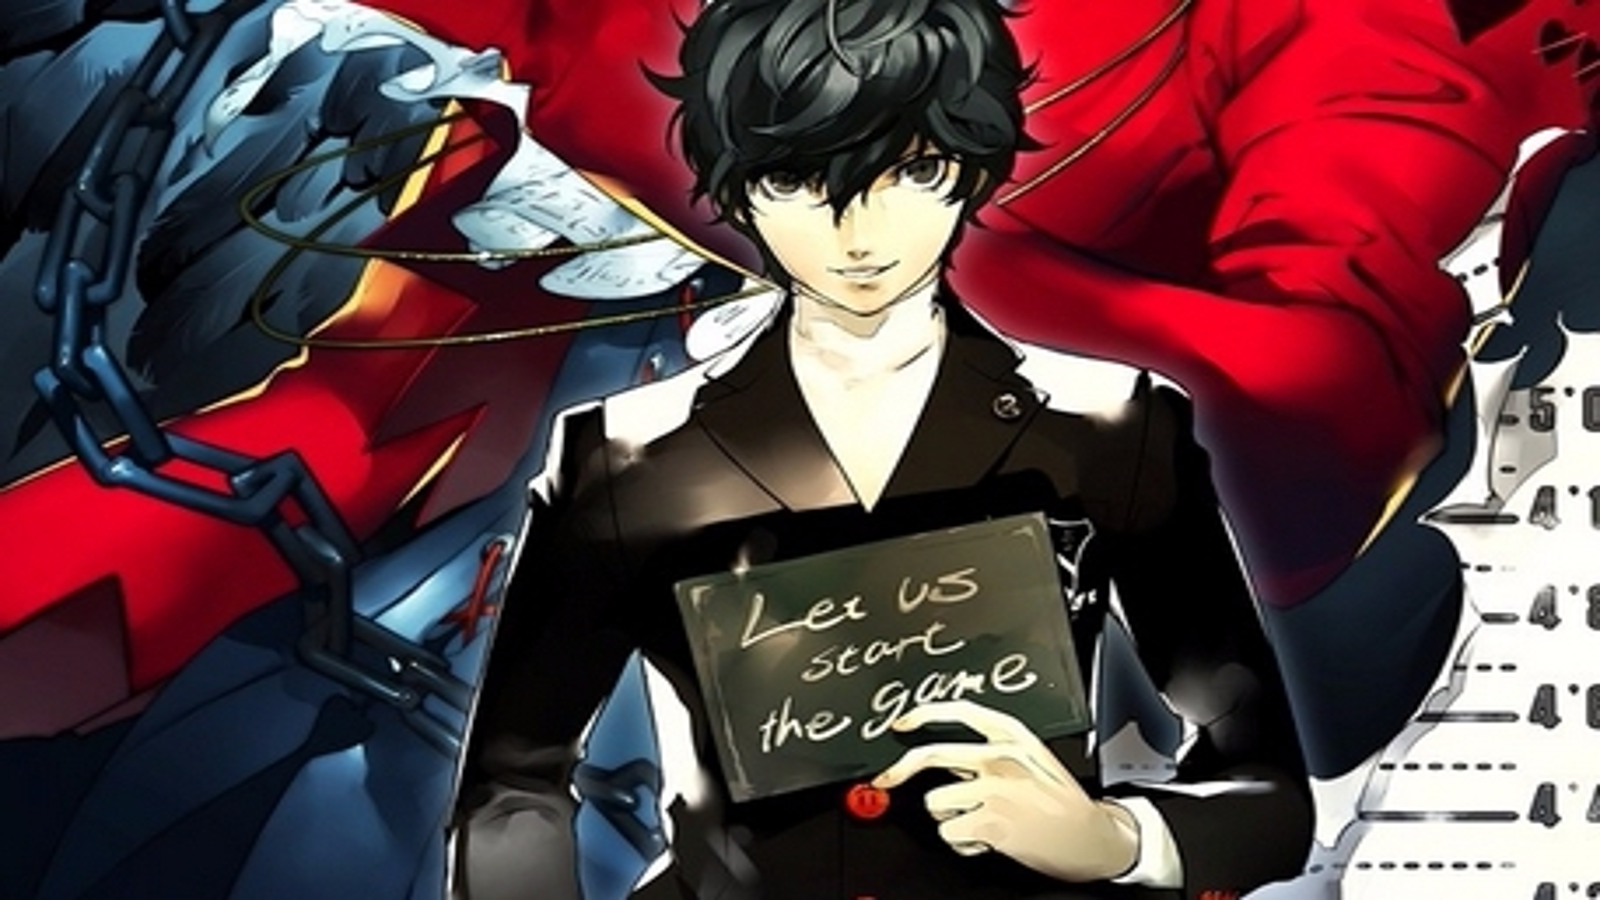 New Persona 5 Details You Won't Find Anywhere Else - Game Informer